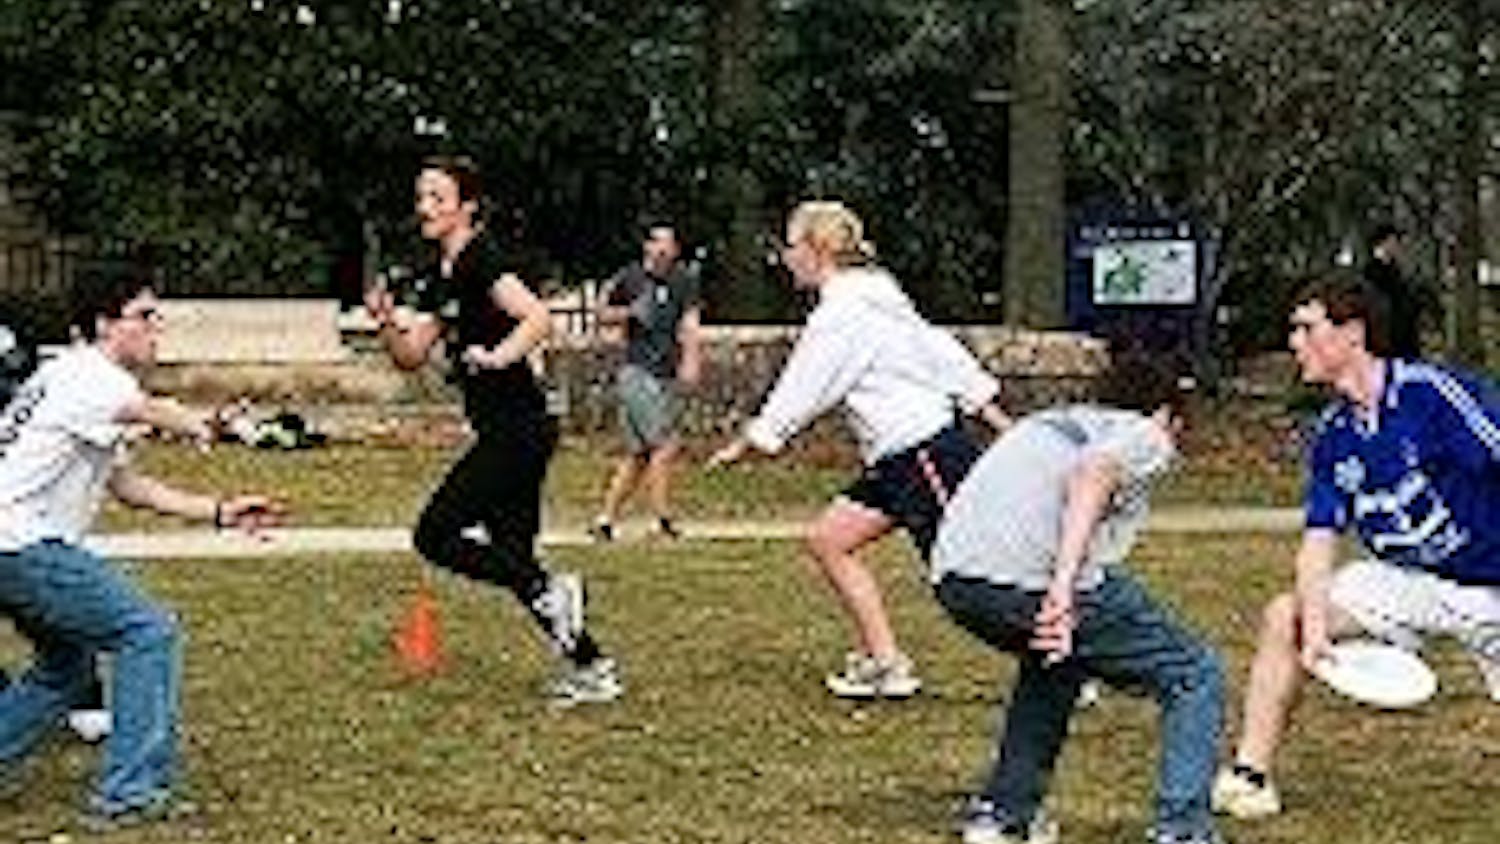 PASSES FOR PEACE - Clubs including Students for Justice in Palestine and AU Students for Israel came together to create "Ultimate Peace," a Frisbee tournament that sought to encourage conflict resolution. The event happened Tuesday in the main quad. Other